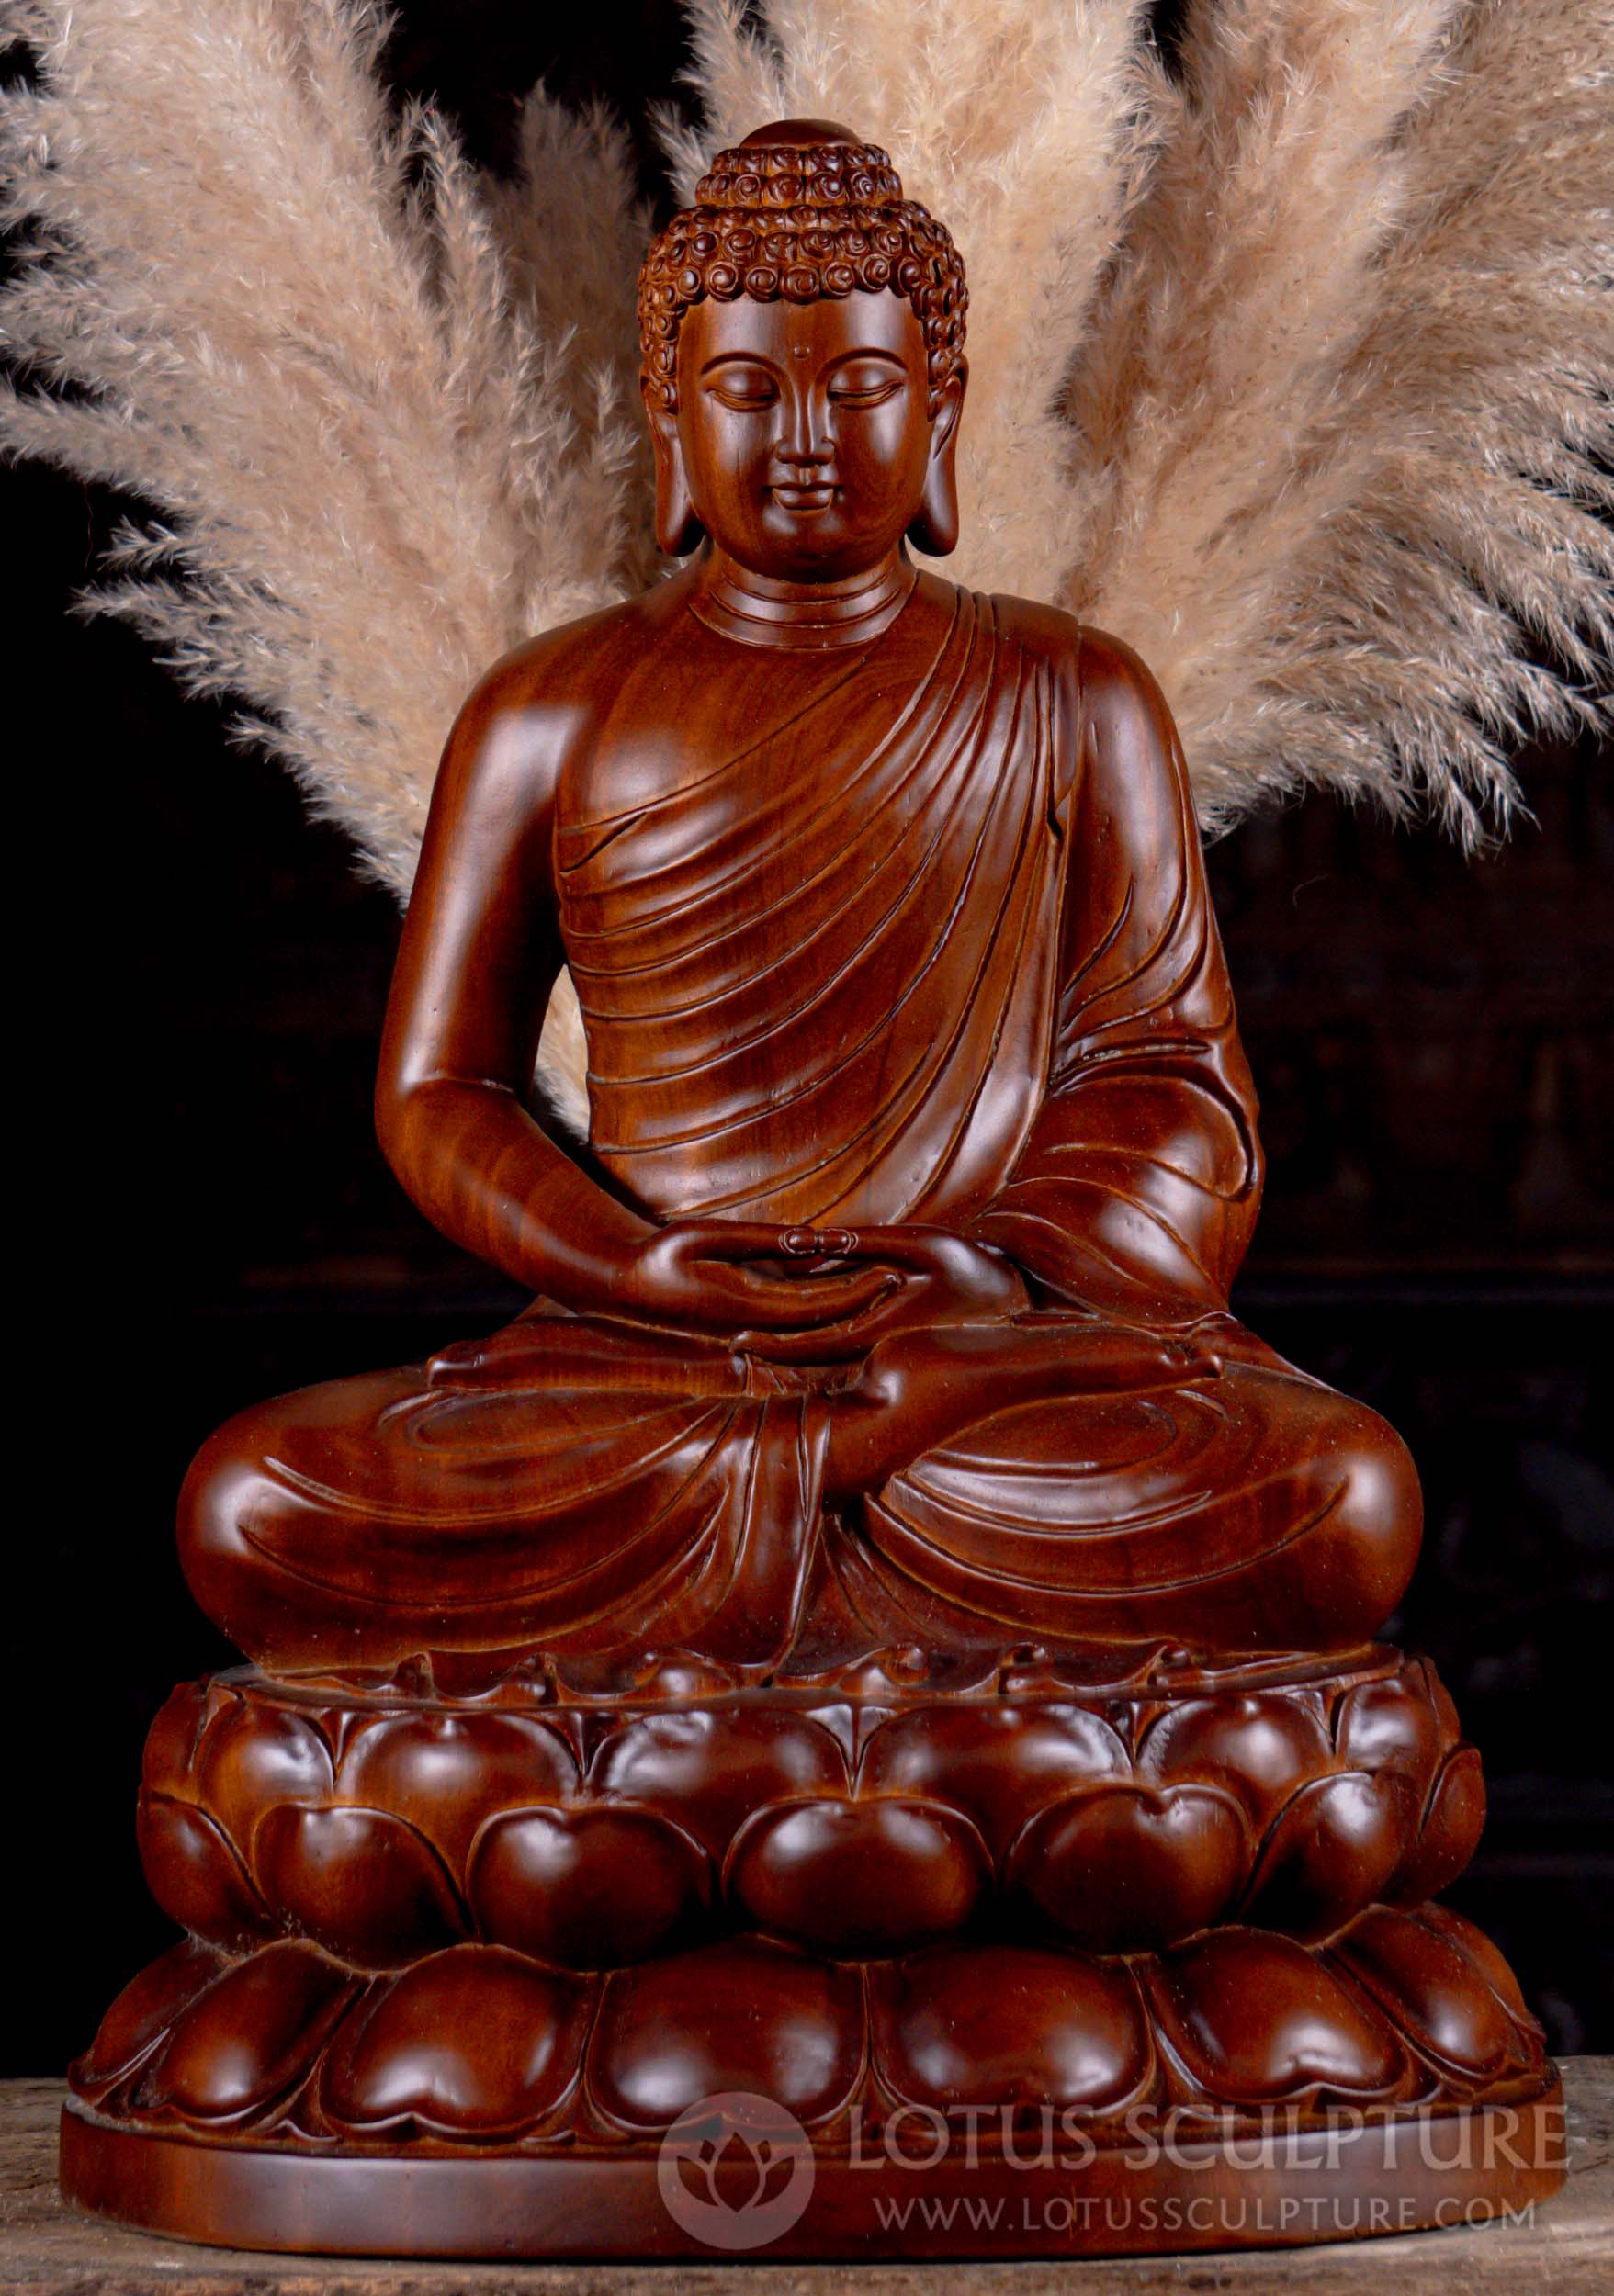 Hand Carved Wood Buddha Sculpture Seated in Full Lotus Pose in Dhyana Mudra  of Meditation 20